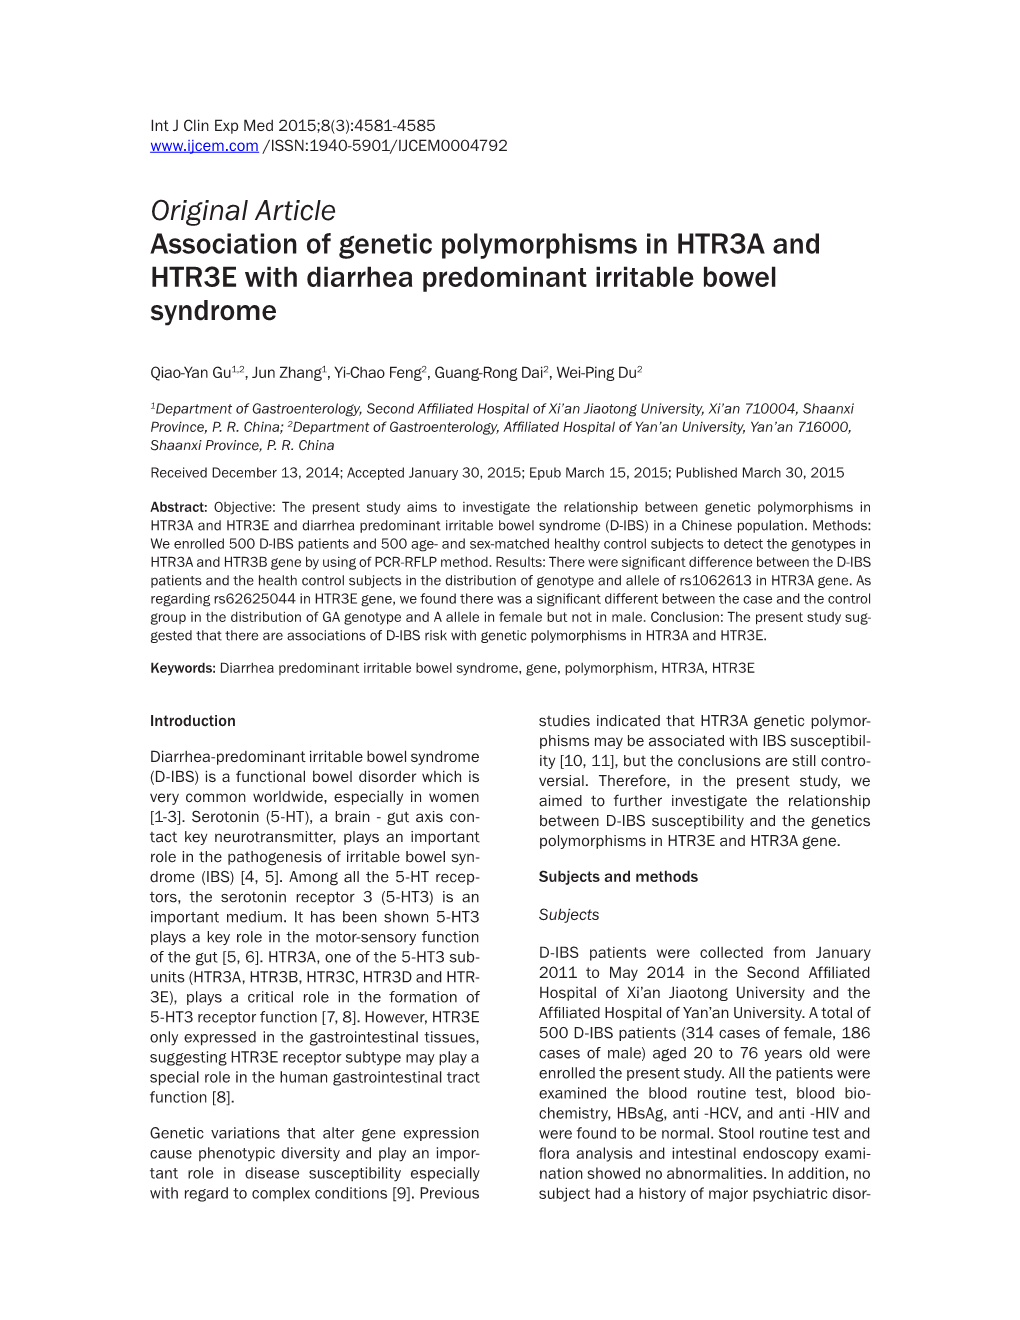 Original Article Association of Genetic Polymorphisms in HTR3A and HTR3E with Diarrhea Predominant Irritable Bowel Syndrome